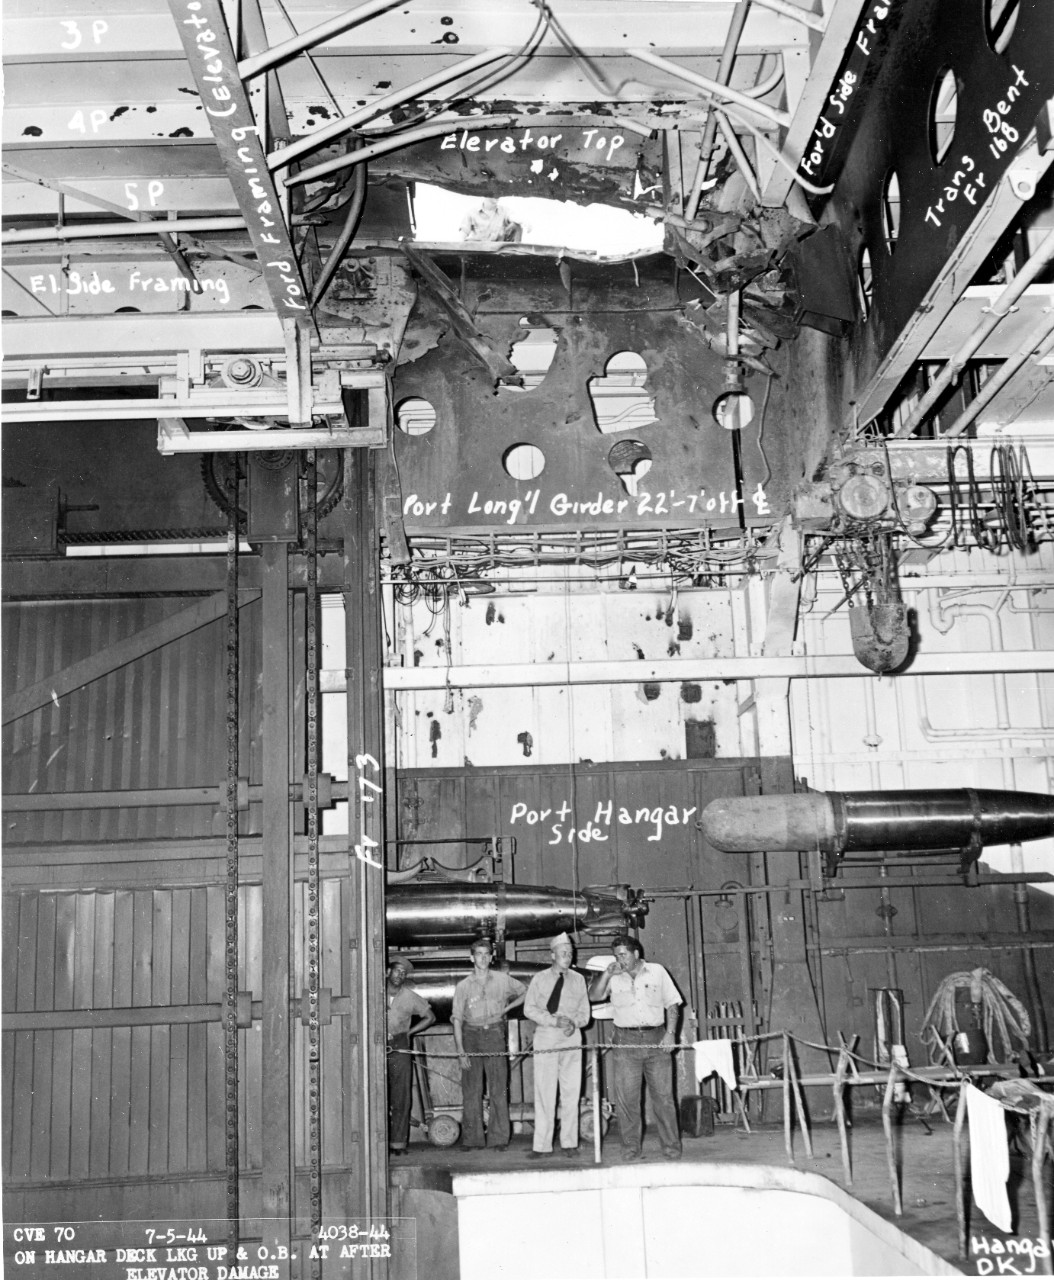 Fanshaw Bay at Pearl Harbor Navy Yard, 5 July 1944, showing a hole in the elevator (top) from a Japanese bomb. Note the size when compared to the man seen on the flight deck, and the size of the men on the hangar deck involved in inspecting the d...